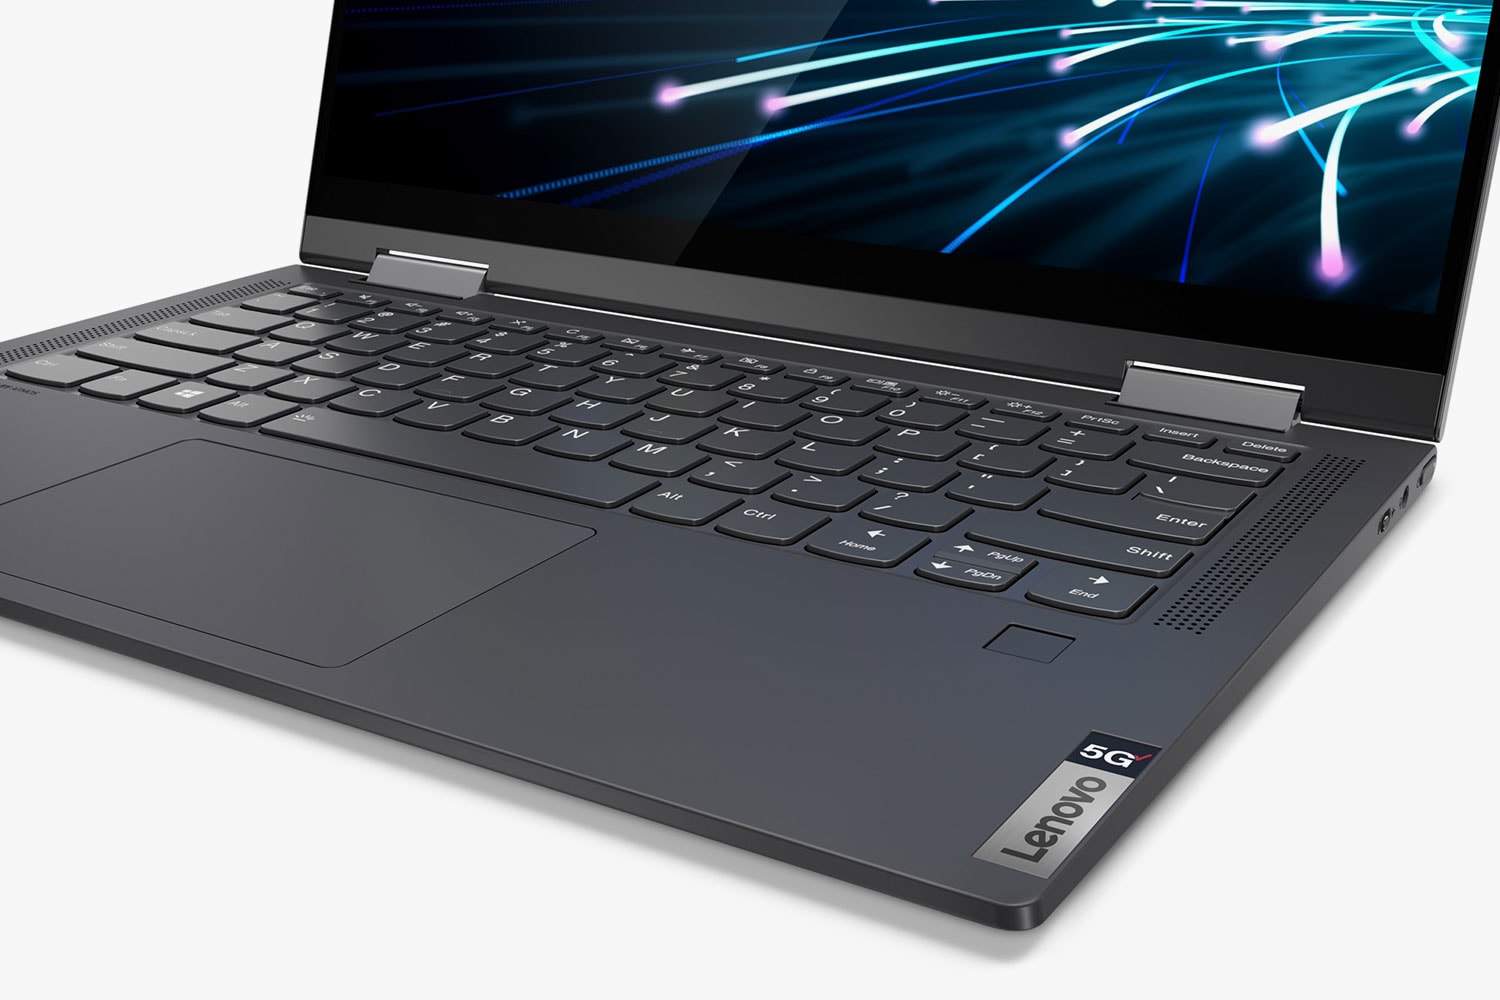 Lenovo Flex 5G laptop fifth generation network higher multi-Gbps data speeds lower latency more reliability